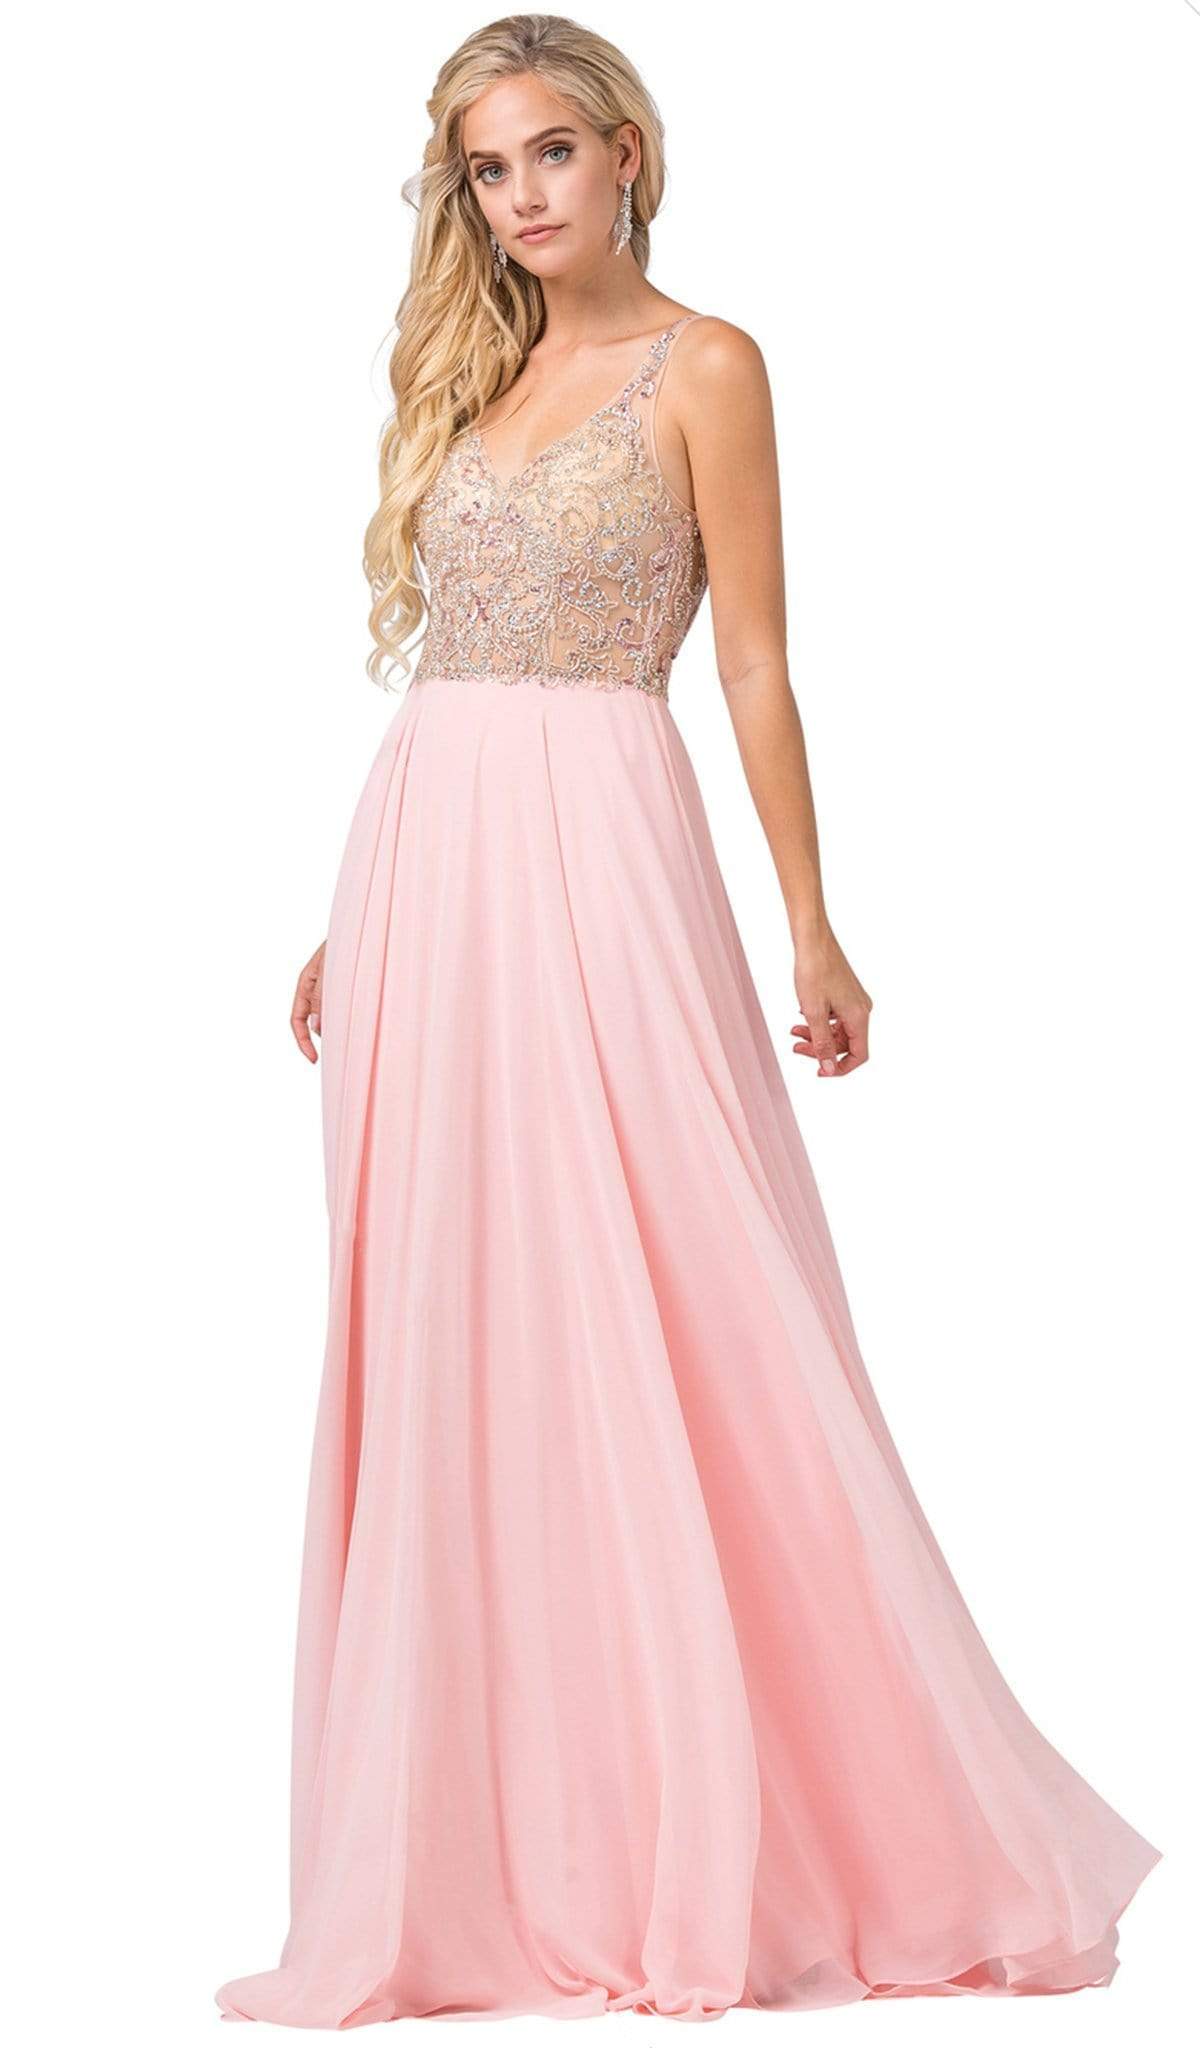 Image of Dancing Queen - 2513 Beaded Embellished Illusion Bodice Chiffon Gown